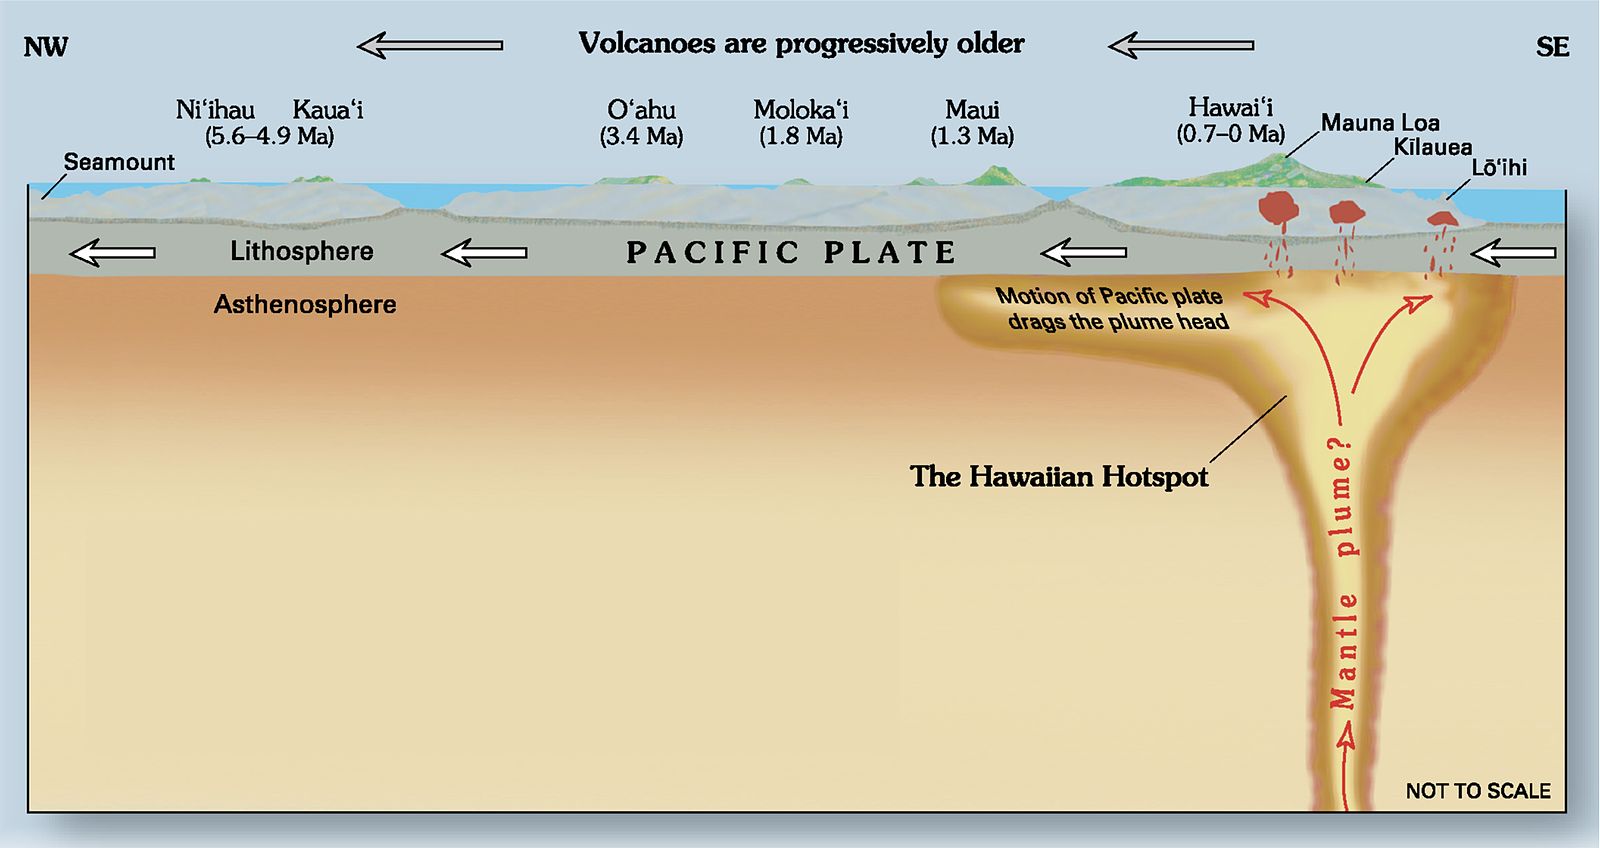 Cross sectional diagram showing the Pacific plate moving toward the left of the diagram with the labels "NW" at the far left and "SE" at the far right. At the right-hand side of the diagram, a vertical mantle plume rises up from deep down, through the asthenosphere, and spreads laterally outward when it reaches the base of the lithosphere. Smaller vertical magma intrusions rise through the lithosphere, creating three volcanoes labeled Mauna Loa, Kilauea, and Lo'ihi. Arrows on the lithosphere point toward the left, indicating the direction that the Pacific Plate is traveling over the mantle plume. Along the top of the diagram is the label "Volcanoes are progressively older" with arrows to the left. There is a chain of volcanic islands on top of the Pacific Plate: from left to right or oldest to youngest, they are Ni'hau and Kaua'i which are labeled 5.6-4.9 Ma, O'ahu labeled 3.4 Ma, Moloka'i labeled 1.8 Ma, Maui labeled 1.3 Ma, and Hawai'i labeled 0.7-0 Ma.